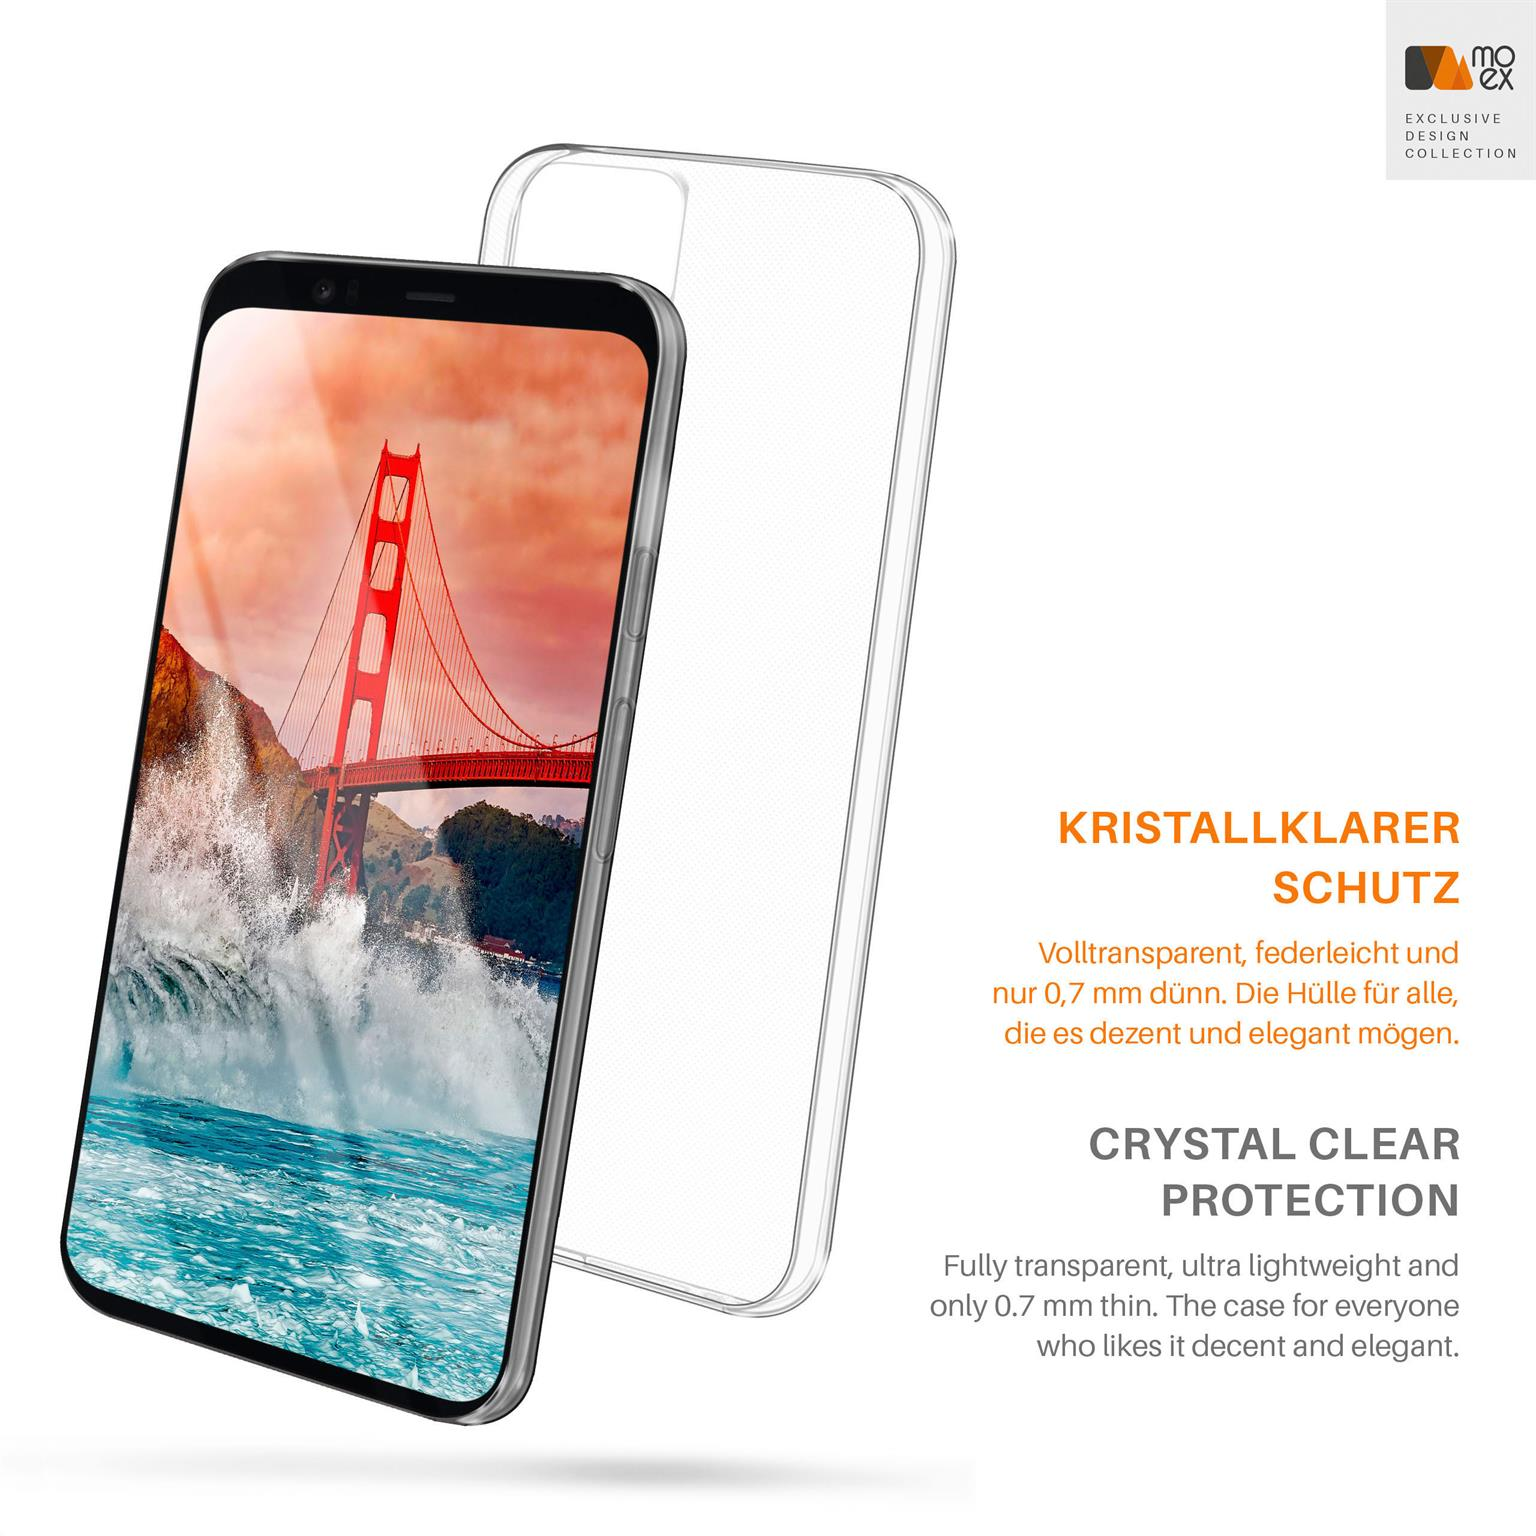 Backcover, Aero Case, Google, Crystal-Clear XL, 4 Pixel MOEX